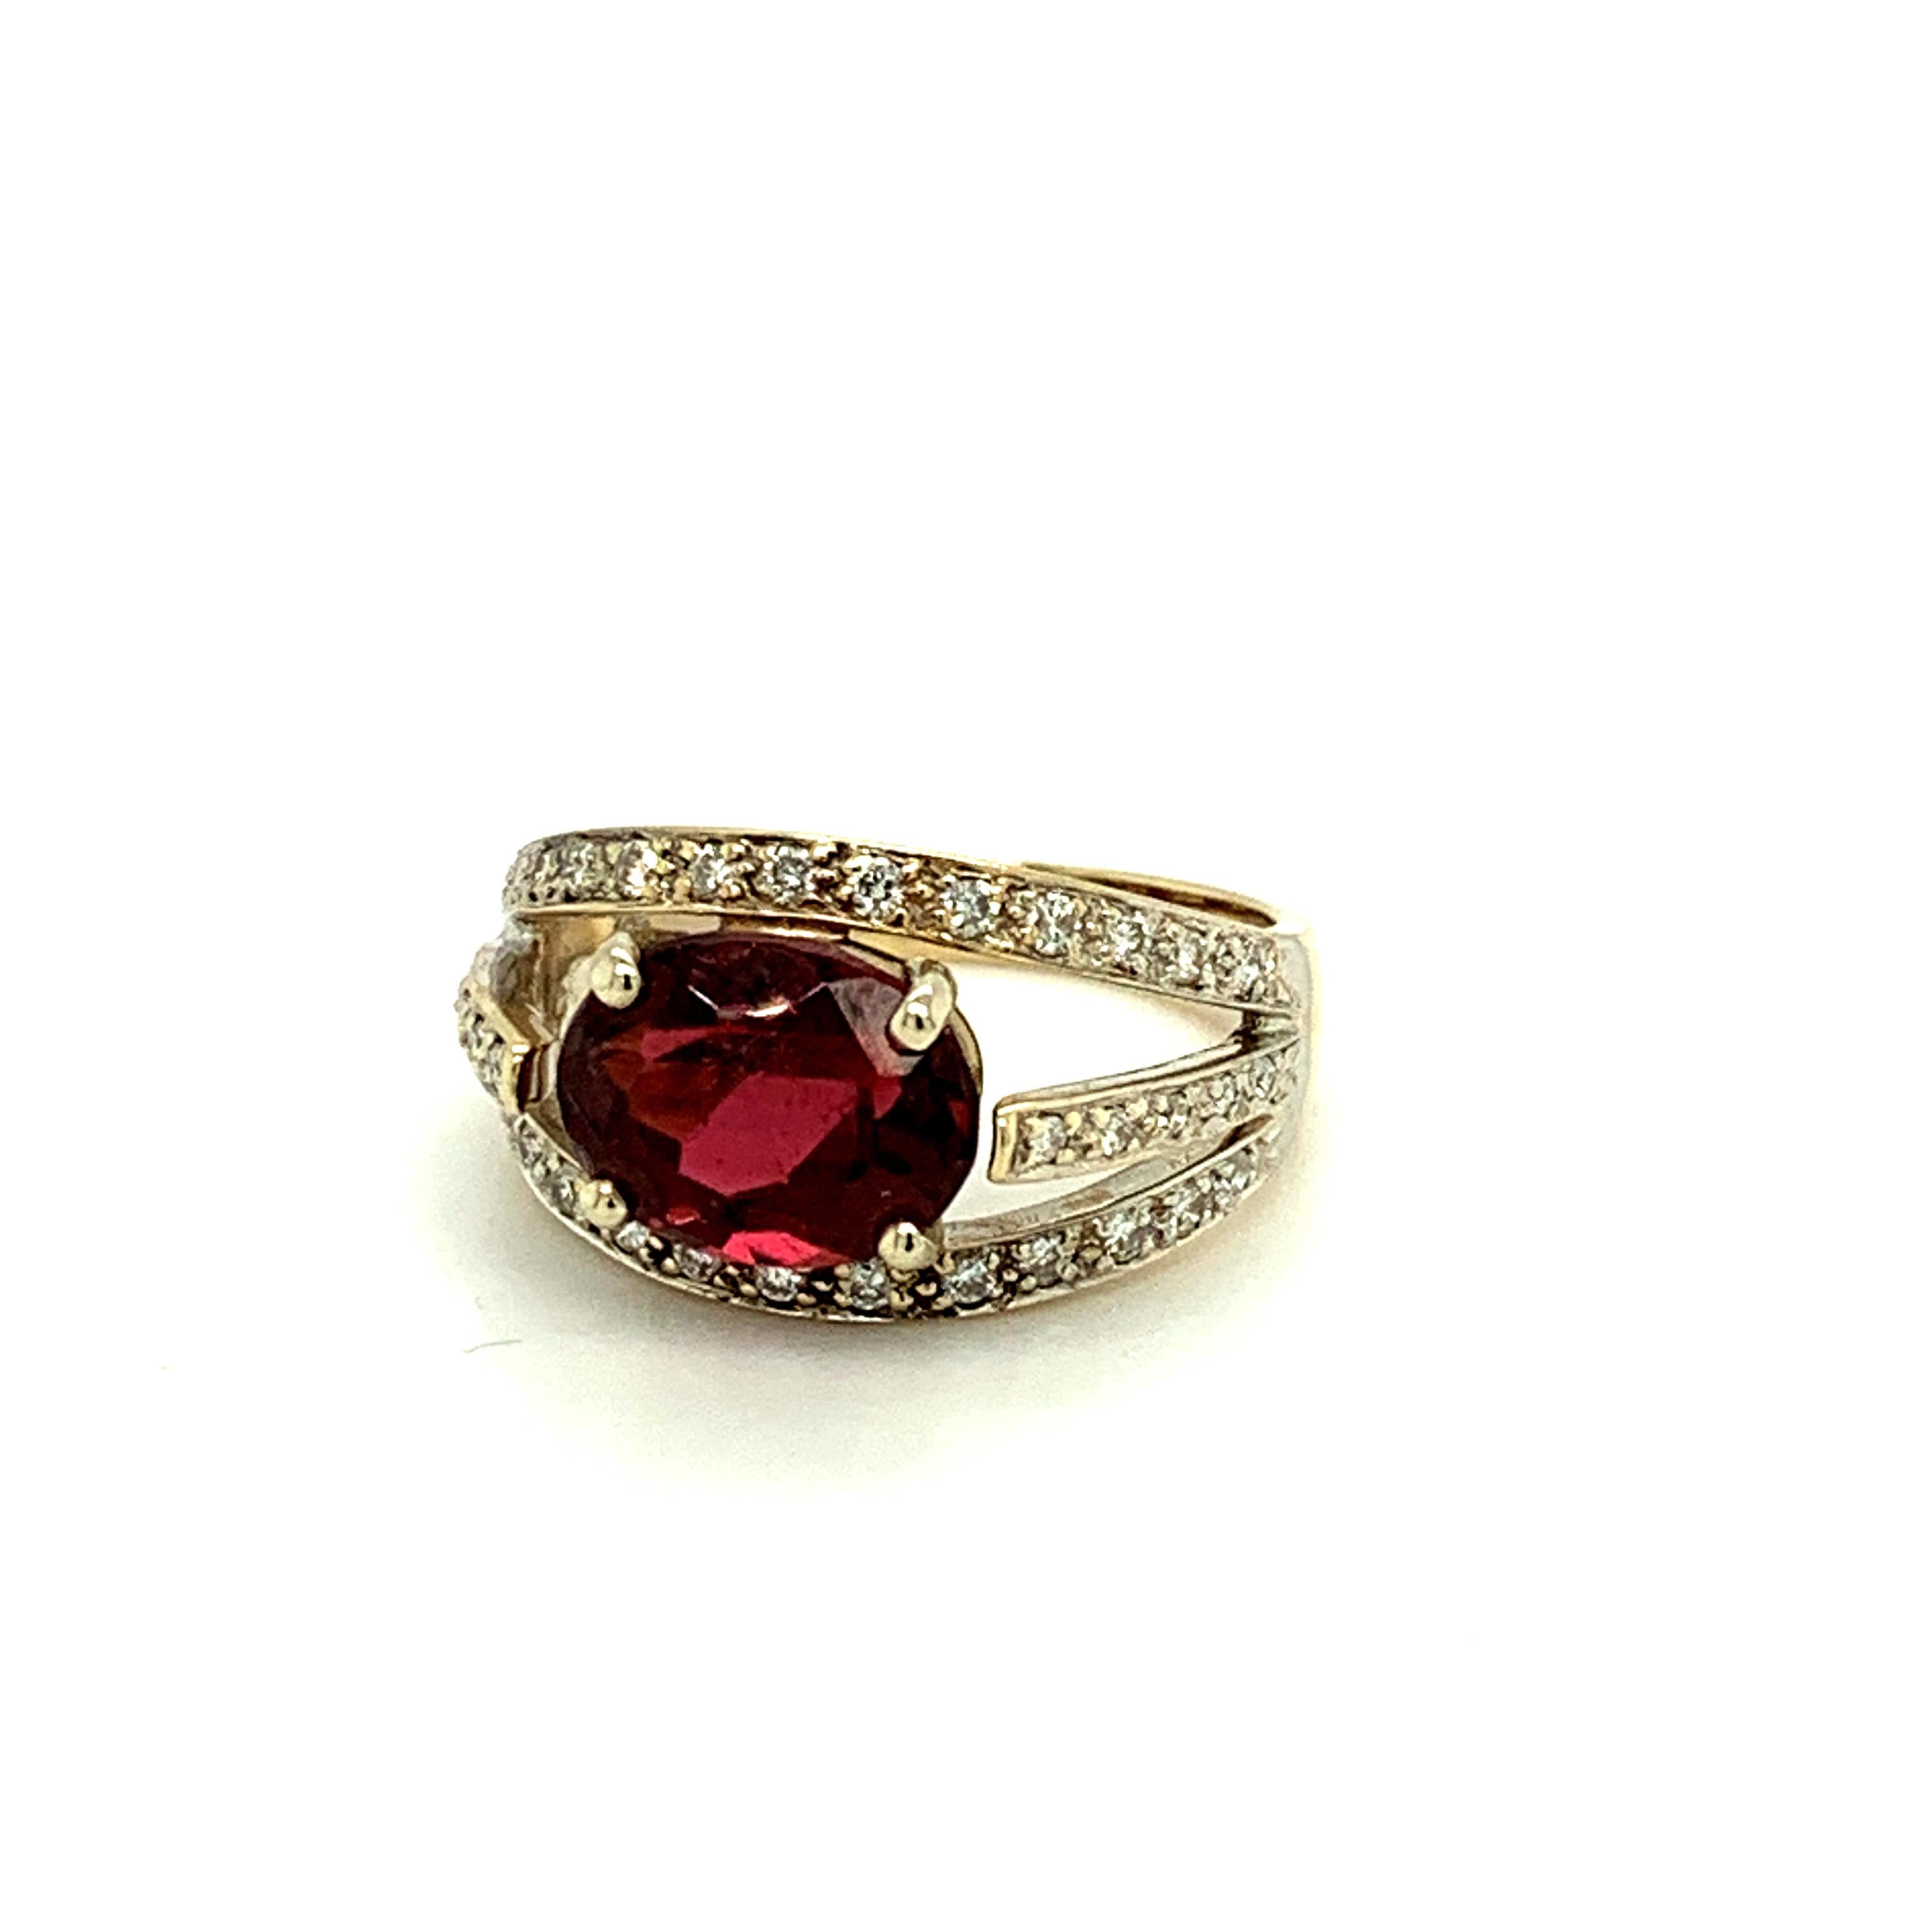 Oval Cut 2.98ct Raspberry Rubellite Genuine Natural Tourmaline Ring '#J207' For Sale